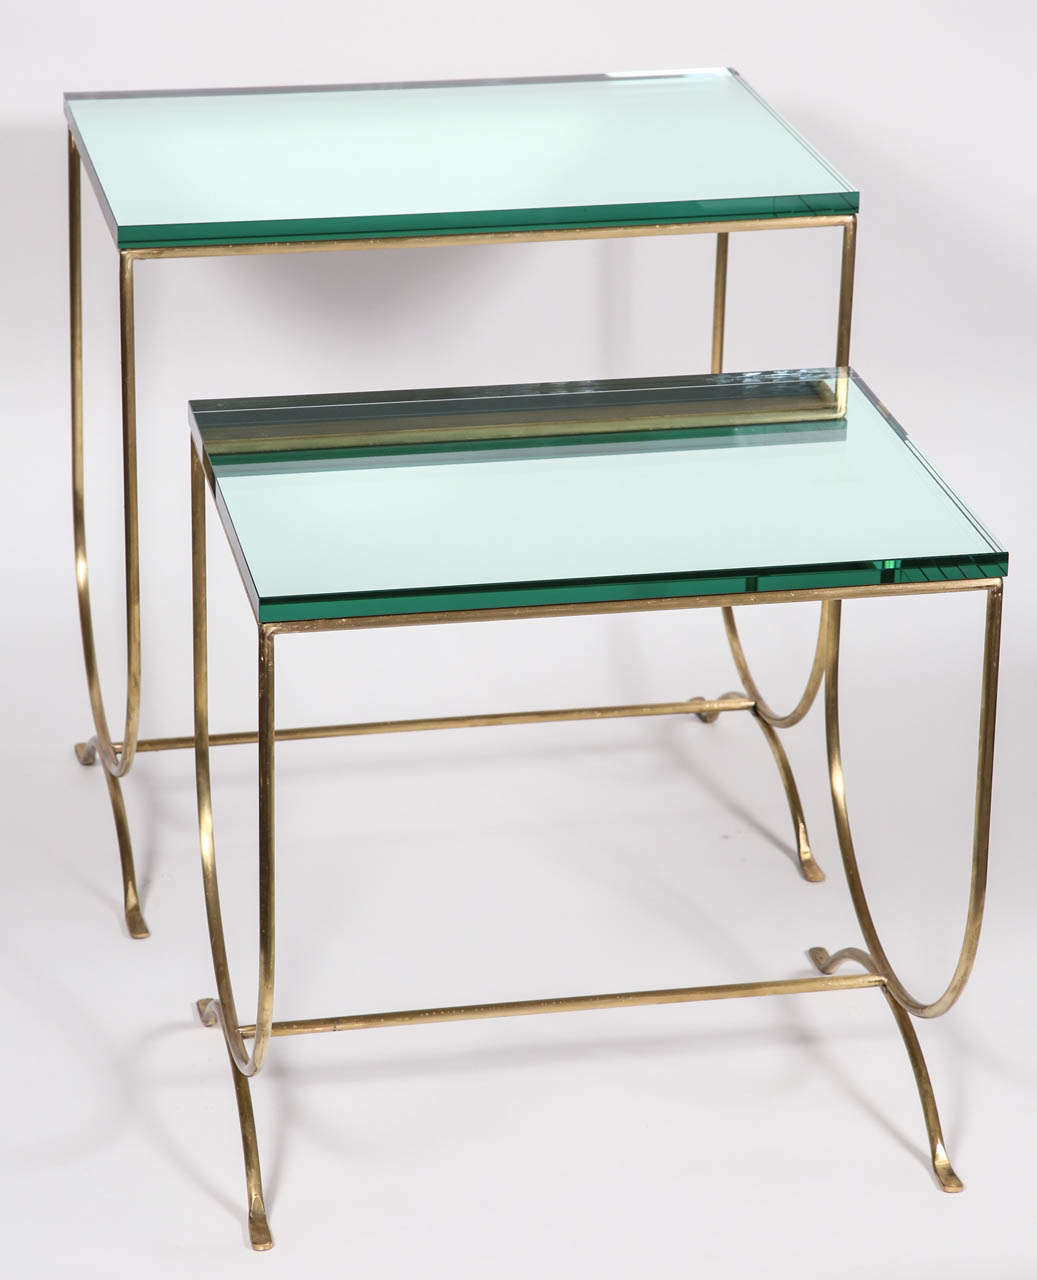 Surface is 3/4 inch straight polished mirror glass; base is solid brass; circa 1970s; dimensions: Lg table - 25'' H x 16'' D x 21'' W - Sm. Table is 21'' H x 16'' D x 21'' W.